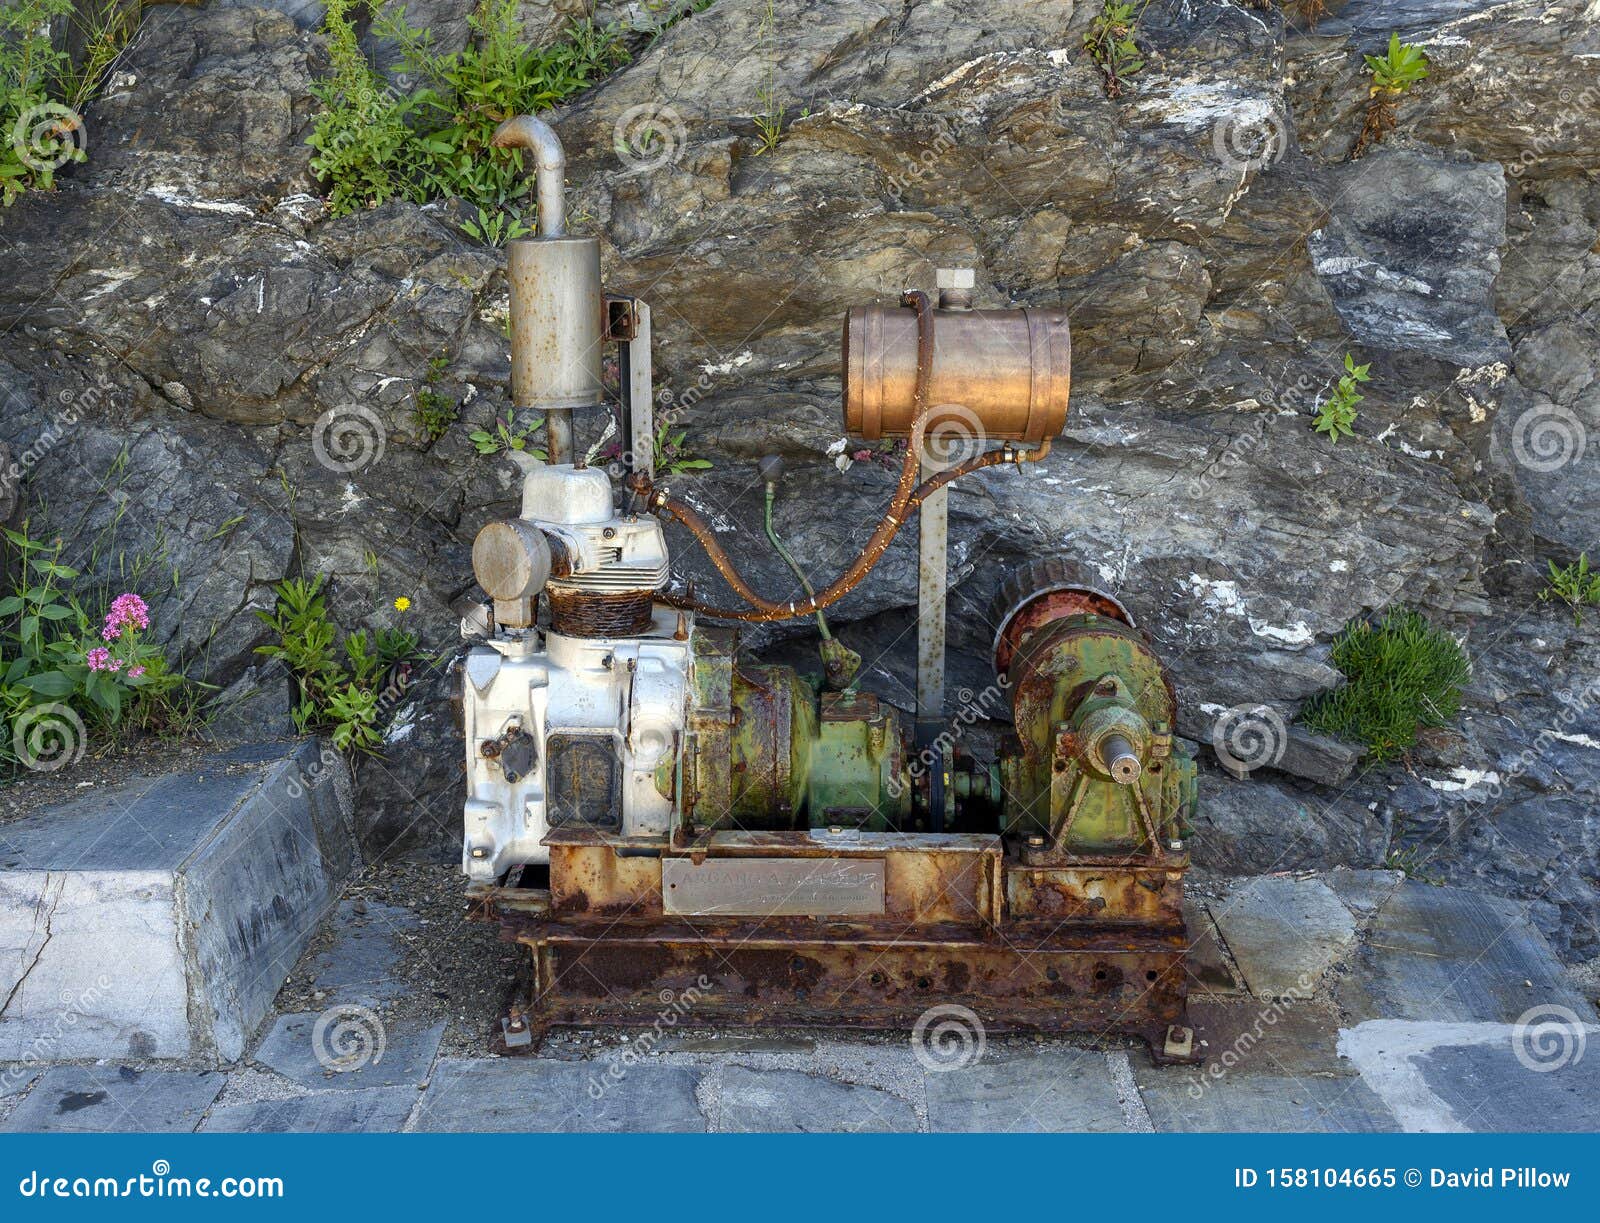 old engine and drive train on display in manarola, the second smallest of the famous cinque terre towns, italy